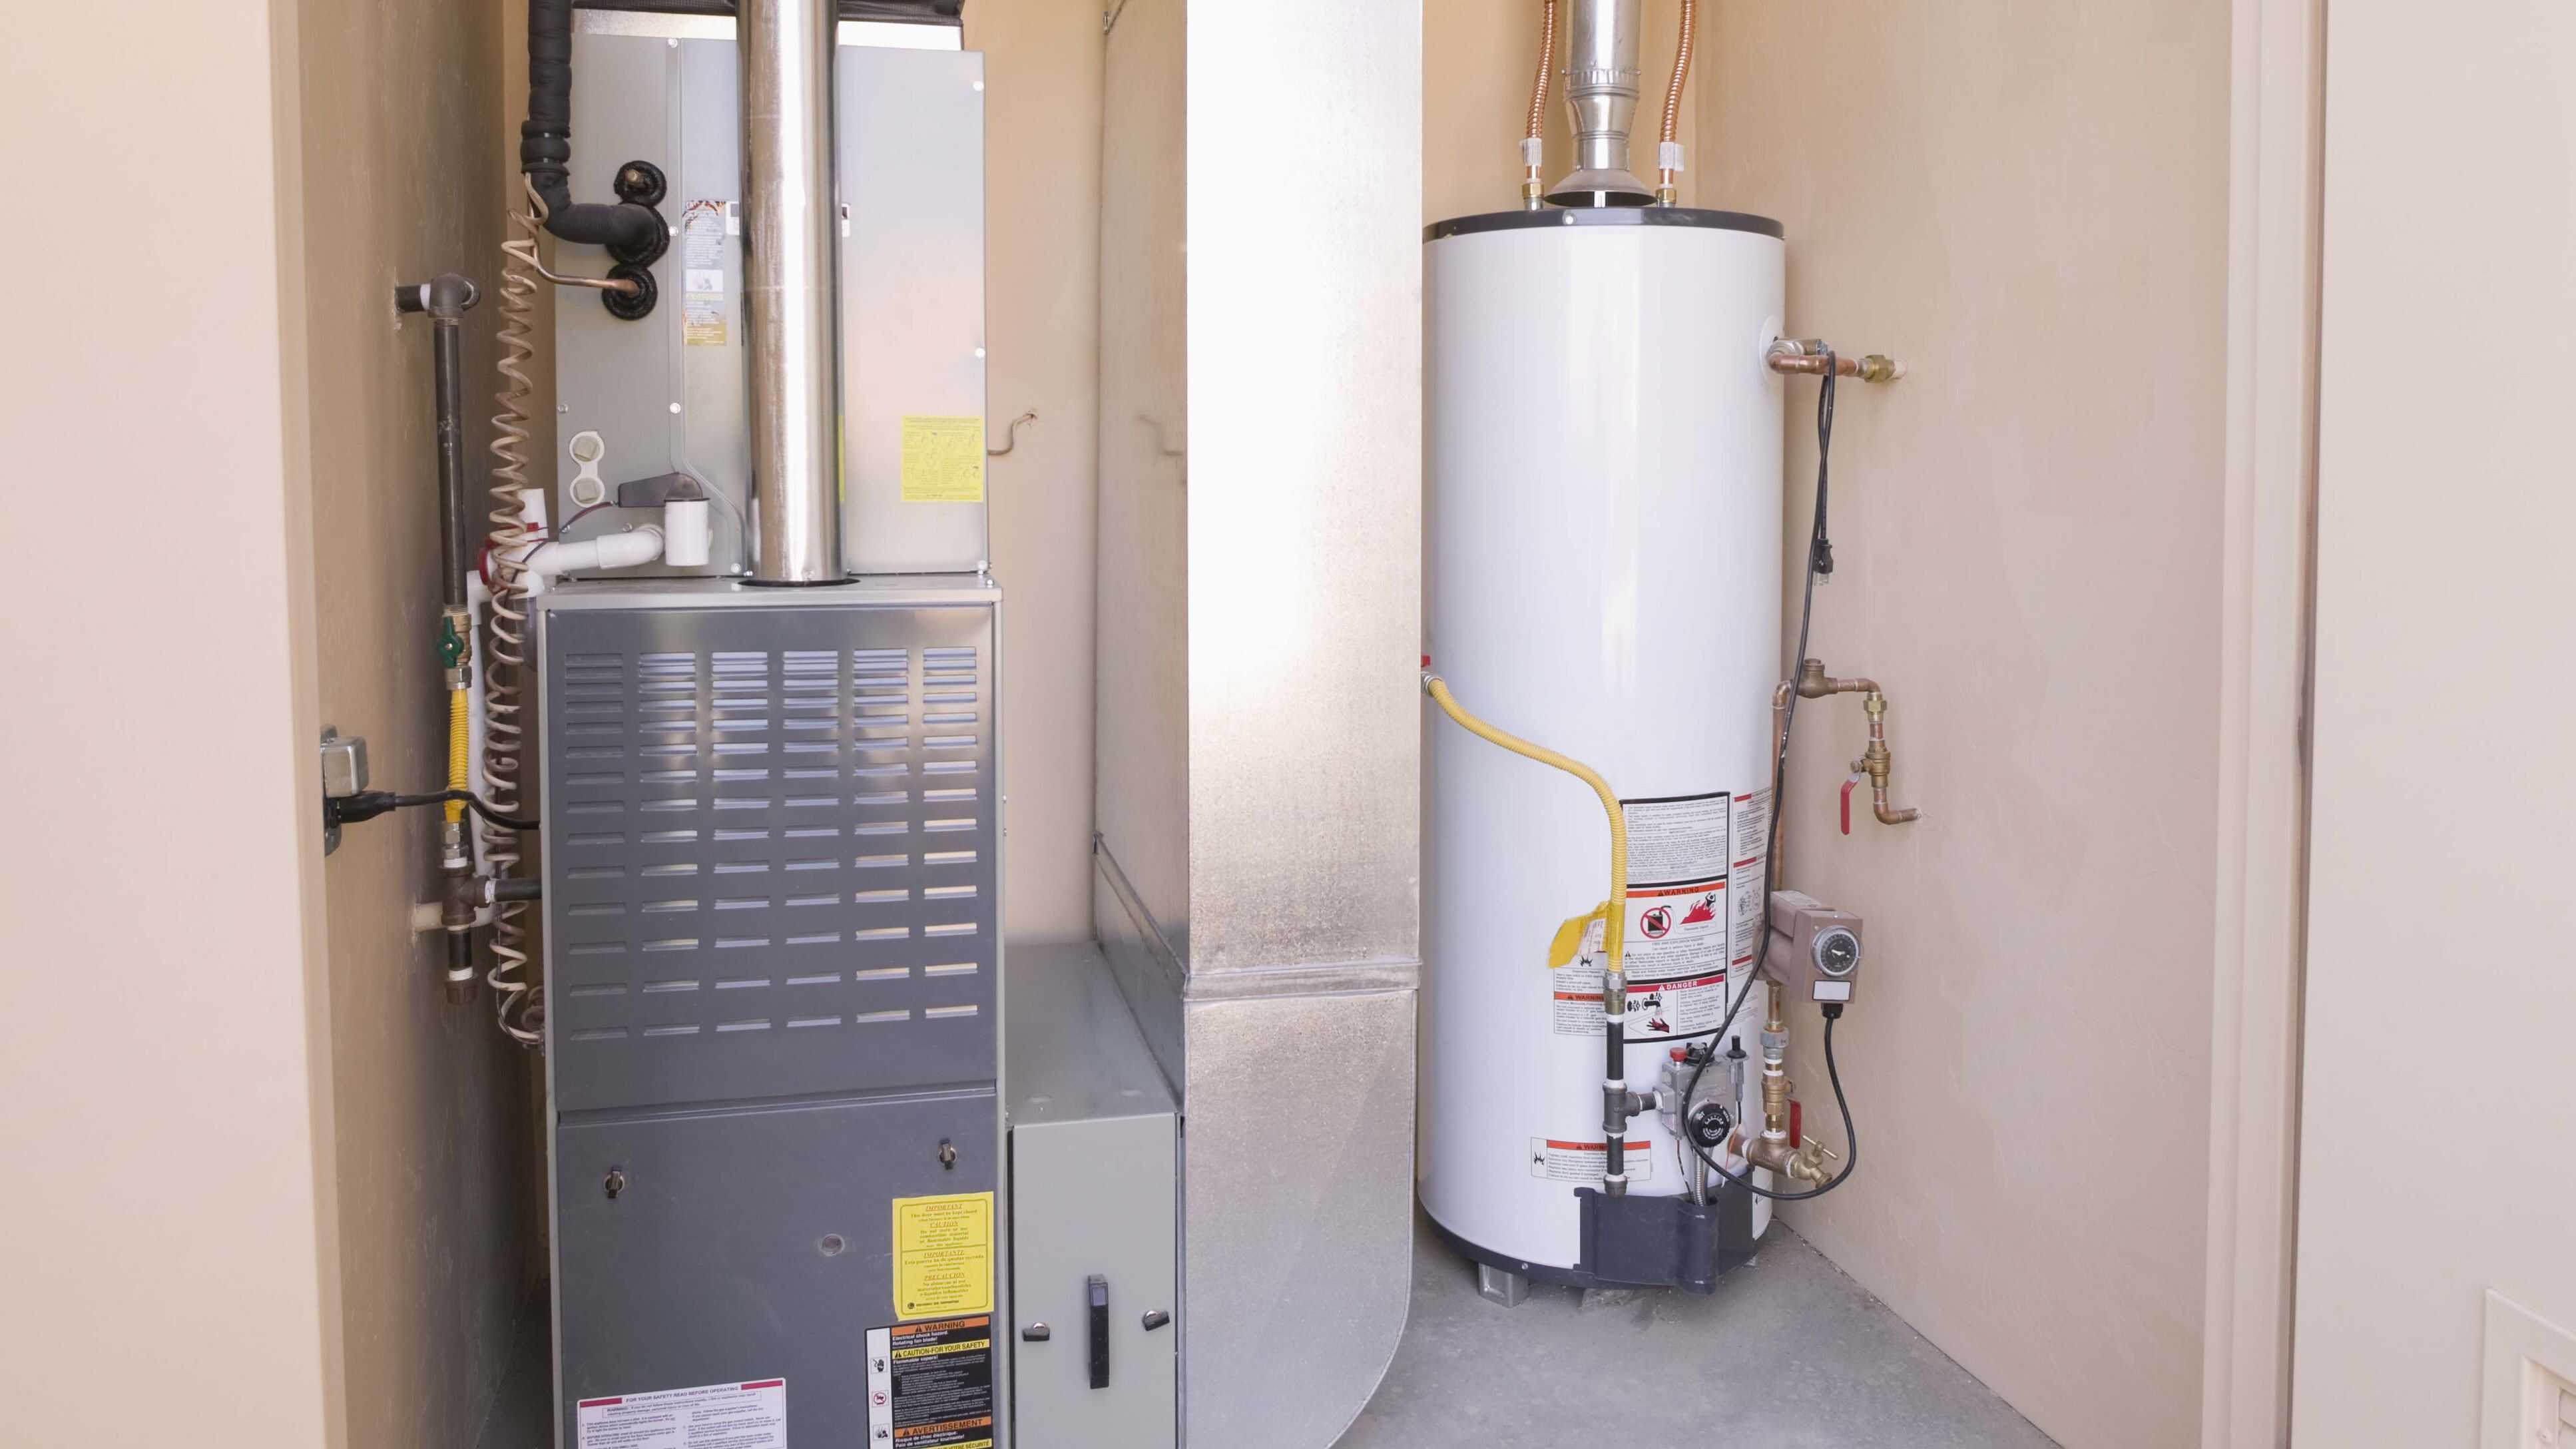 How Does An Electric Hot Water Heater Work